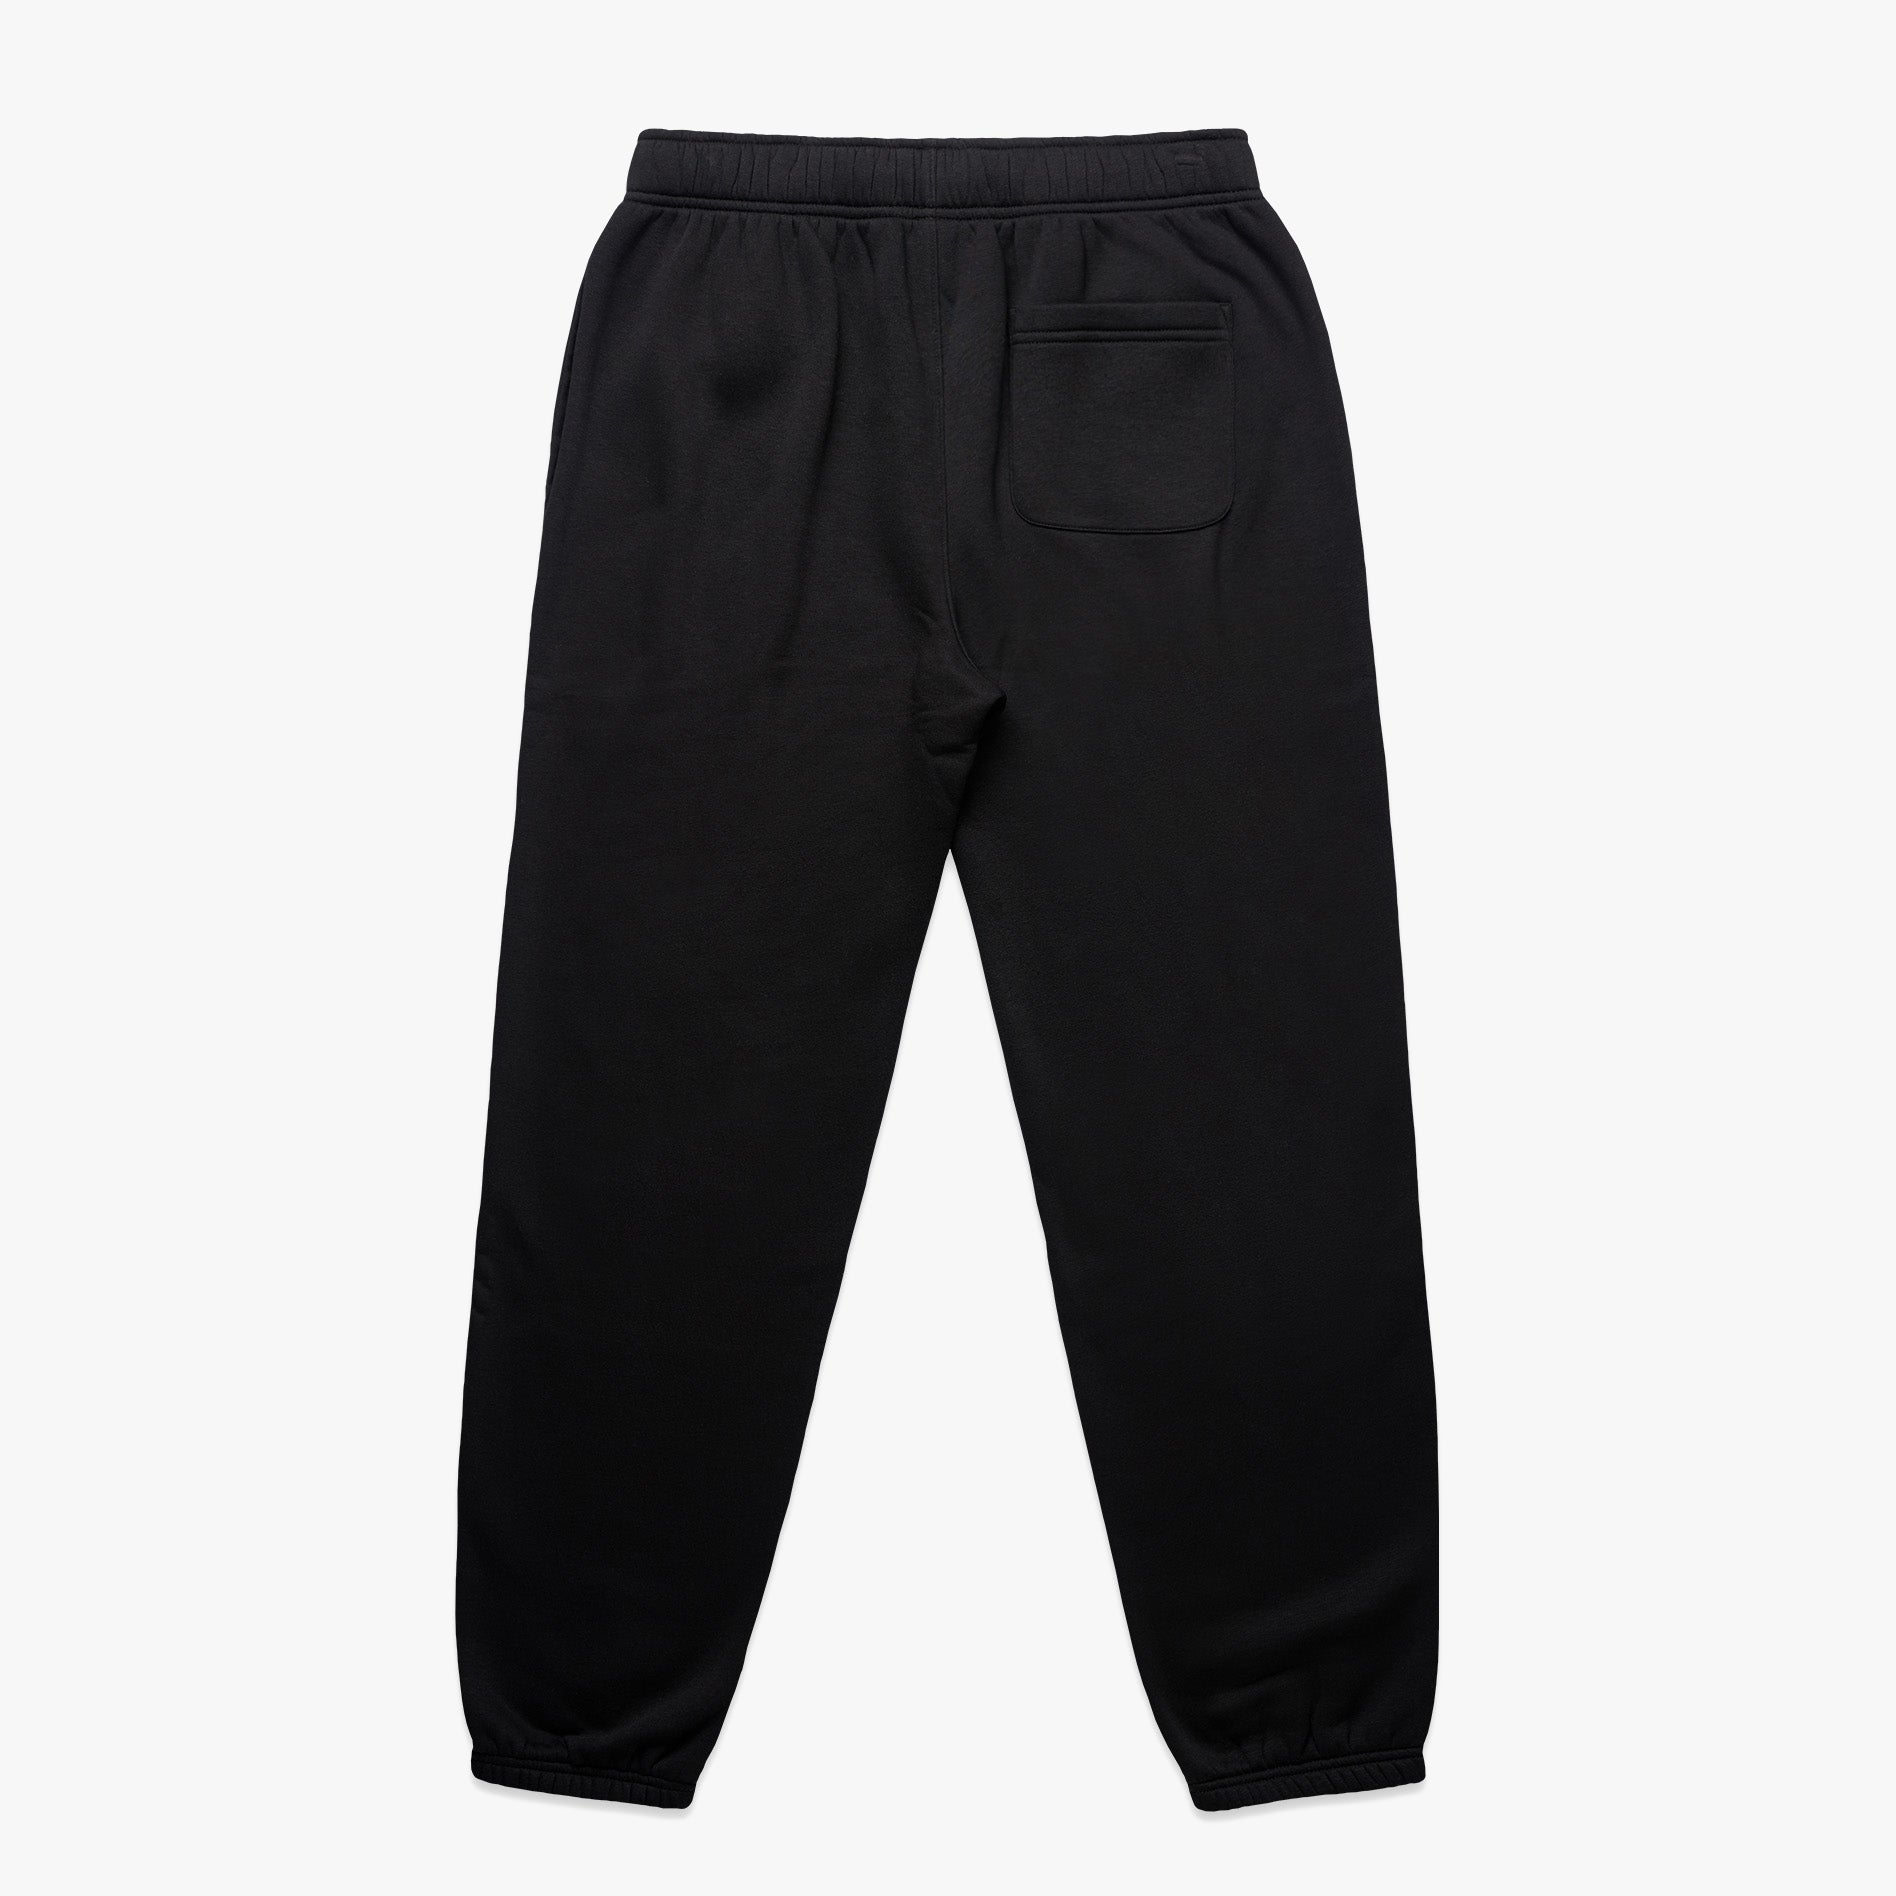 SHEEPEY Staple Relax Trackpants Black